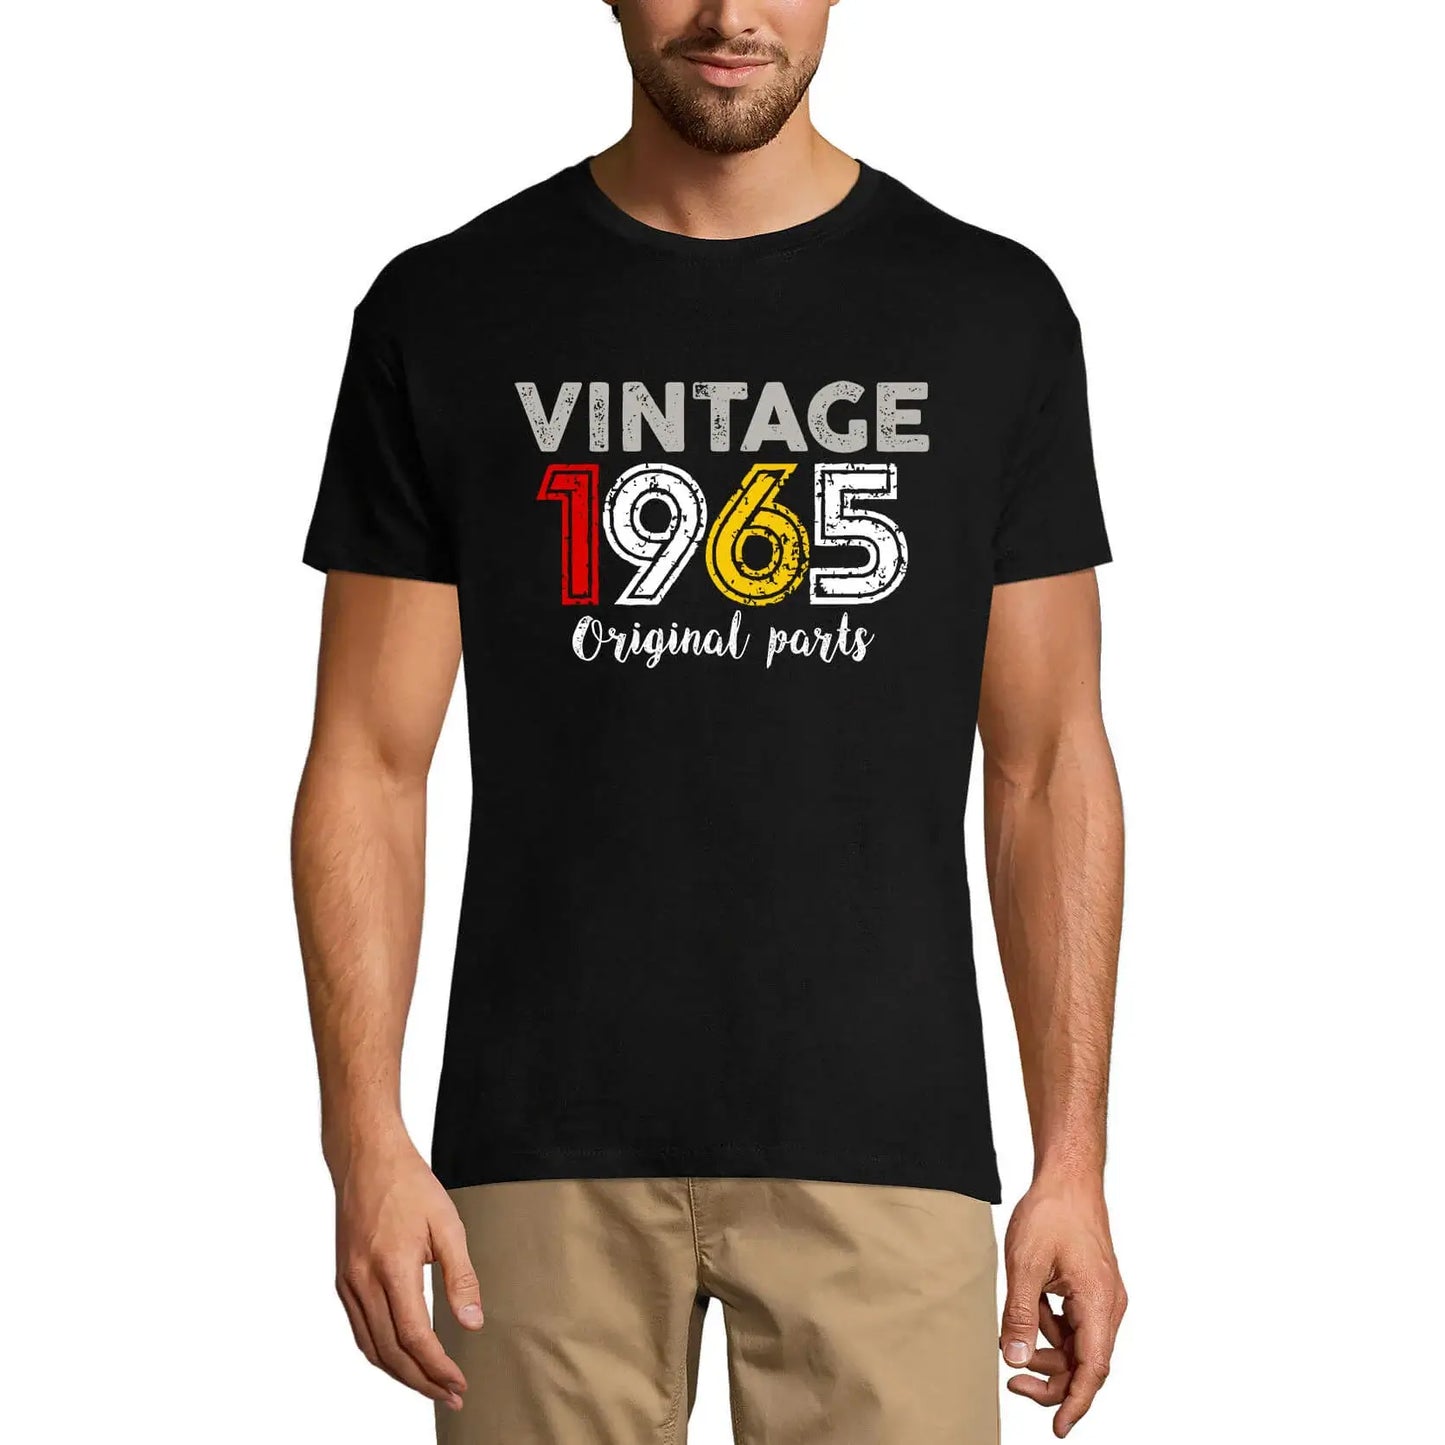 Men's Graphic T-Shirt Original Parts 1965 59th Birthday Anniversary 59 Year Old Gift 1965 Vintage Eco-Friendly Short Sleeve Novelty Tee